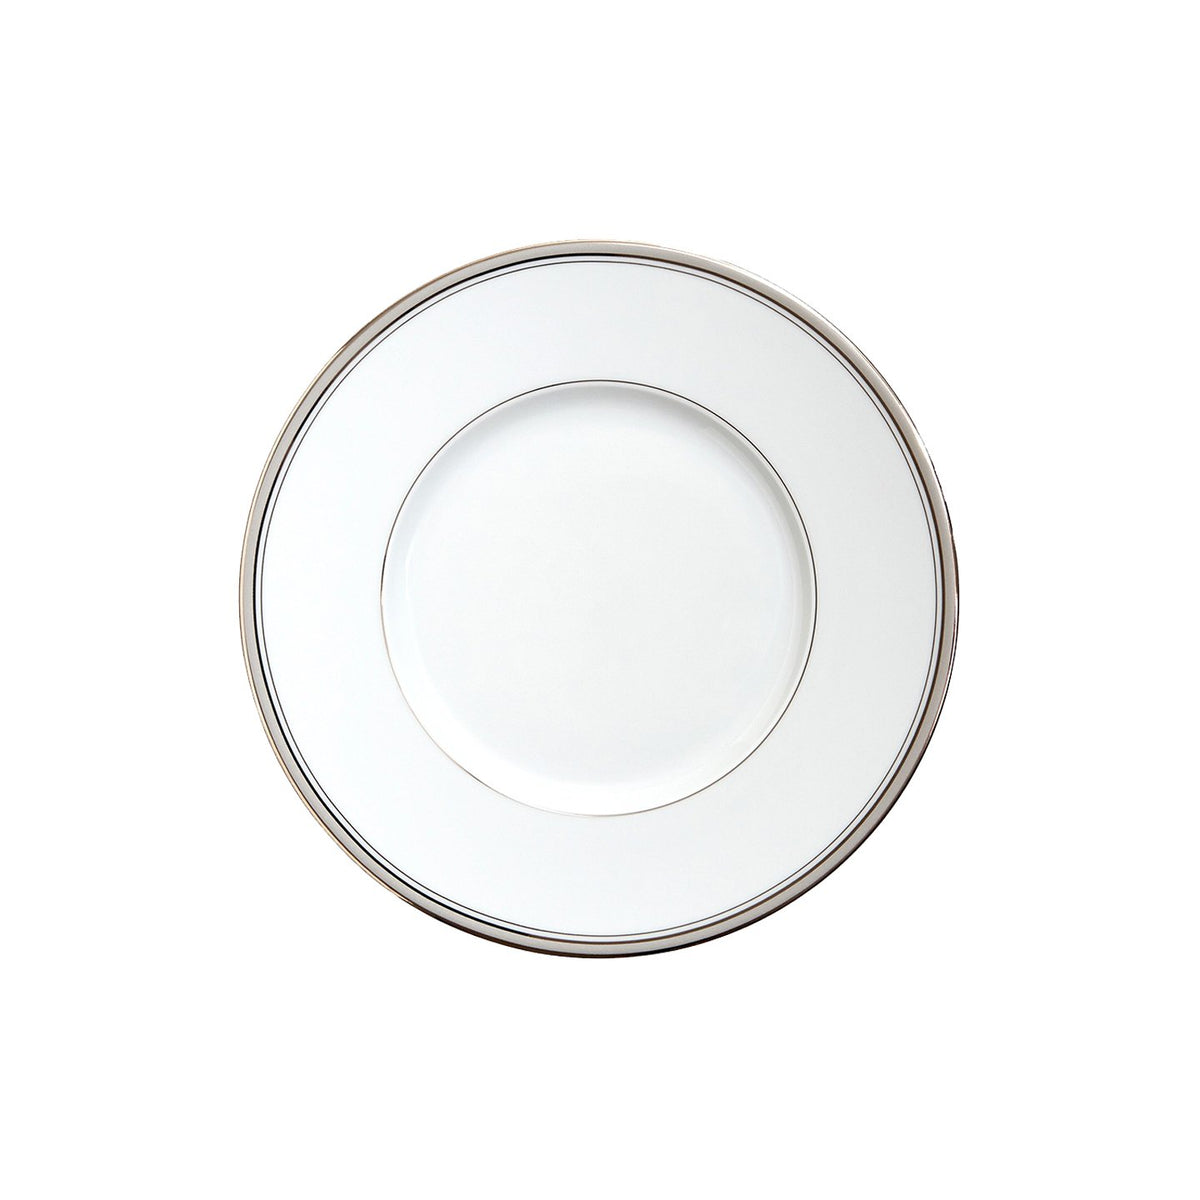 Excellence Grey Salad Plate